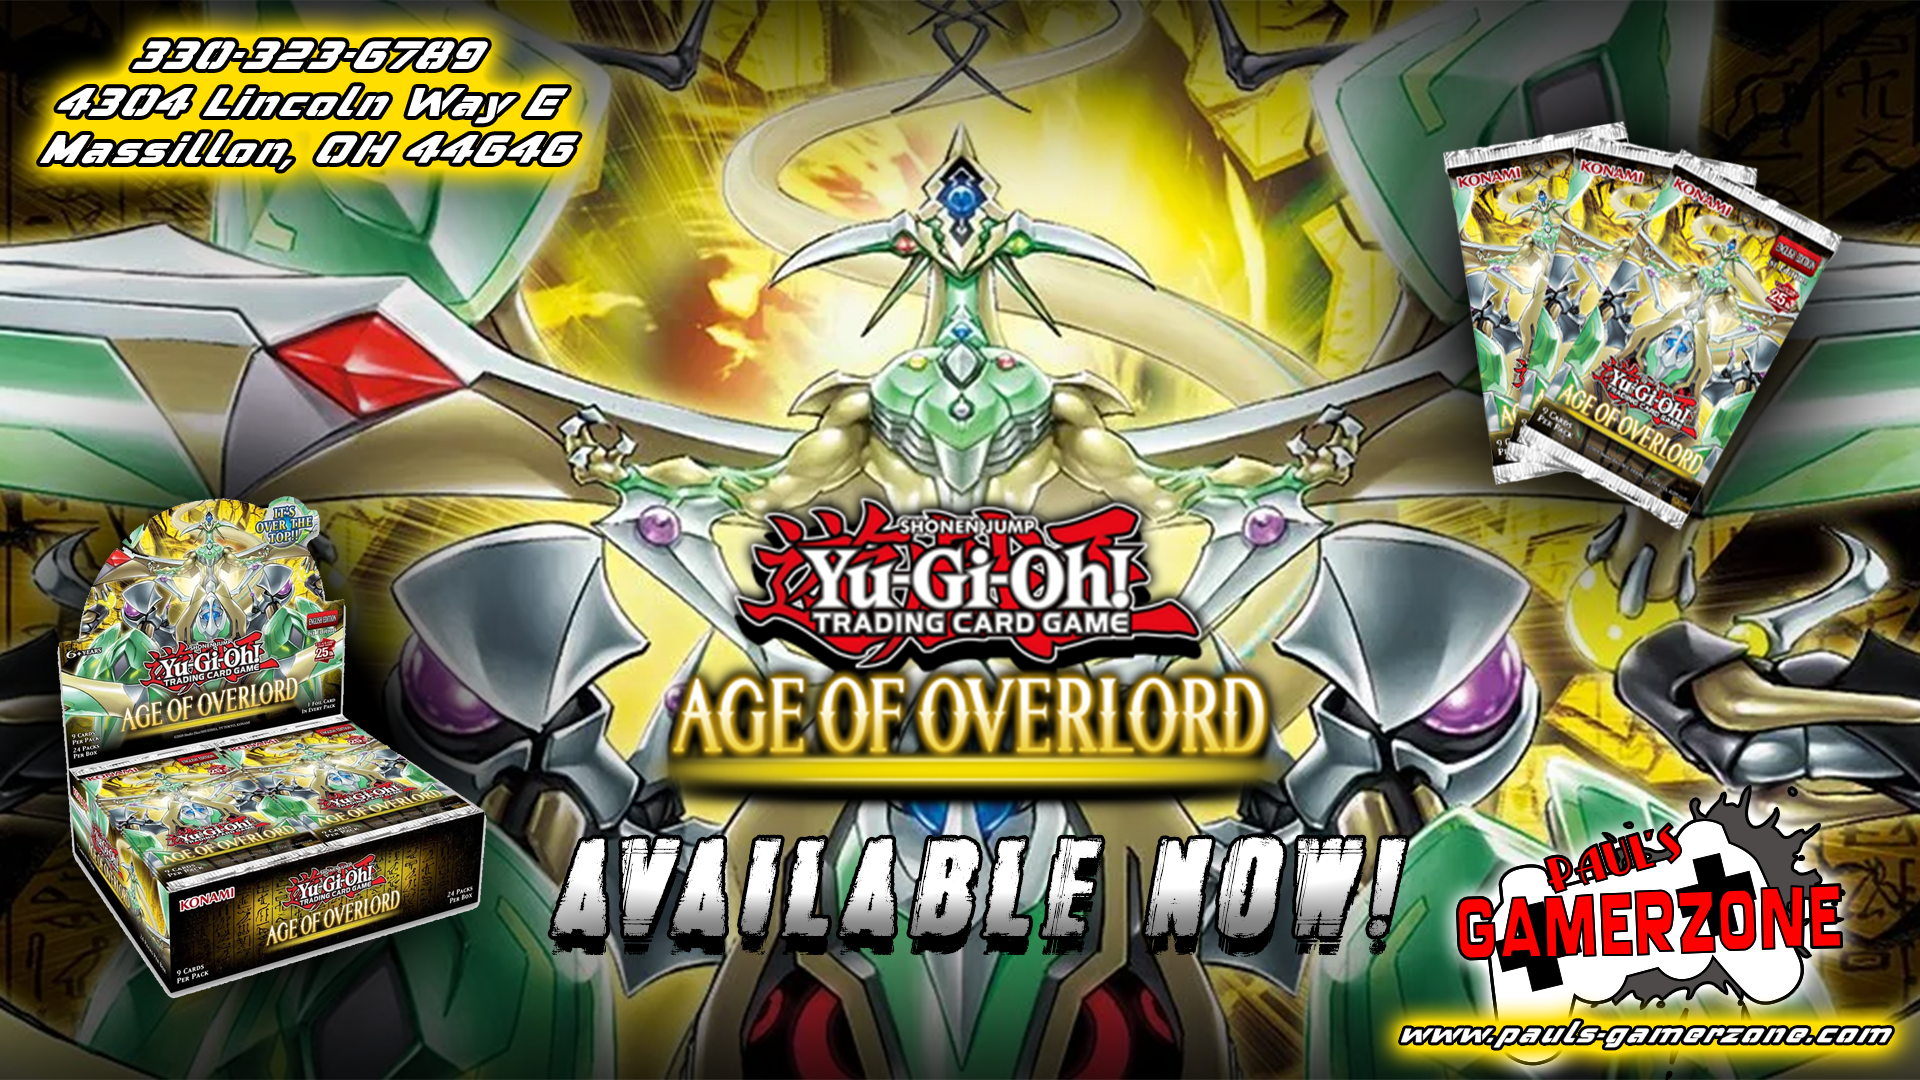 Age of Overlord!